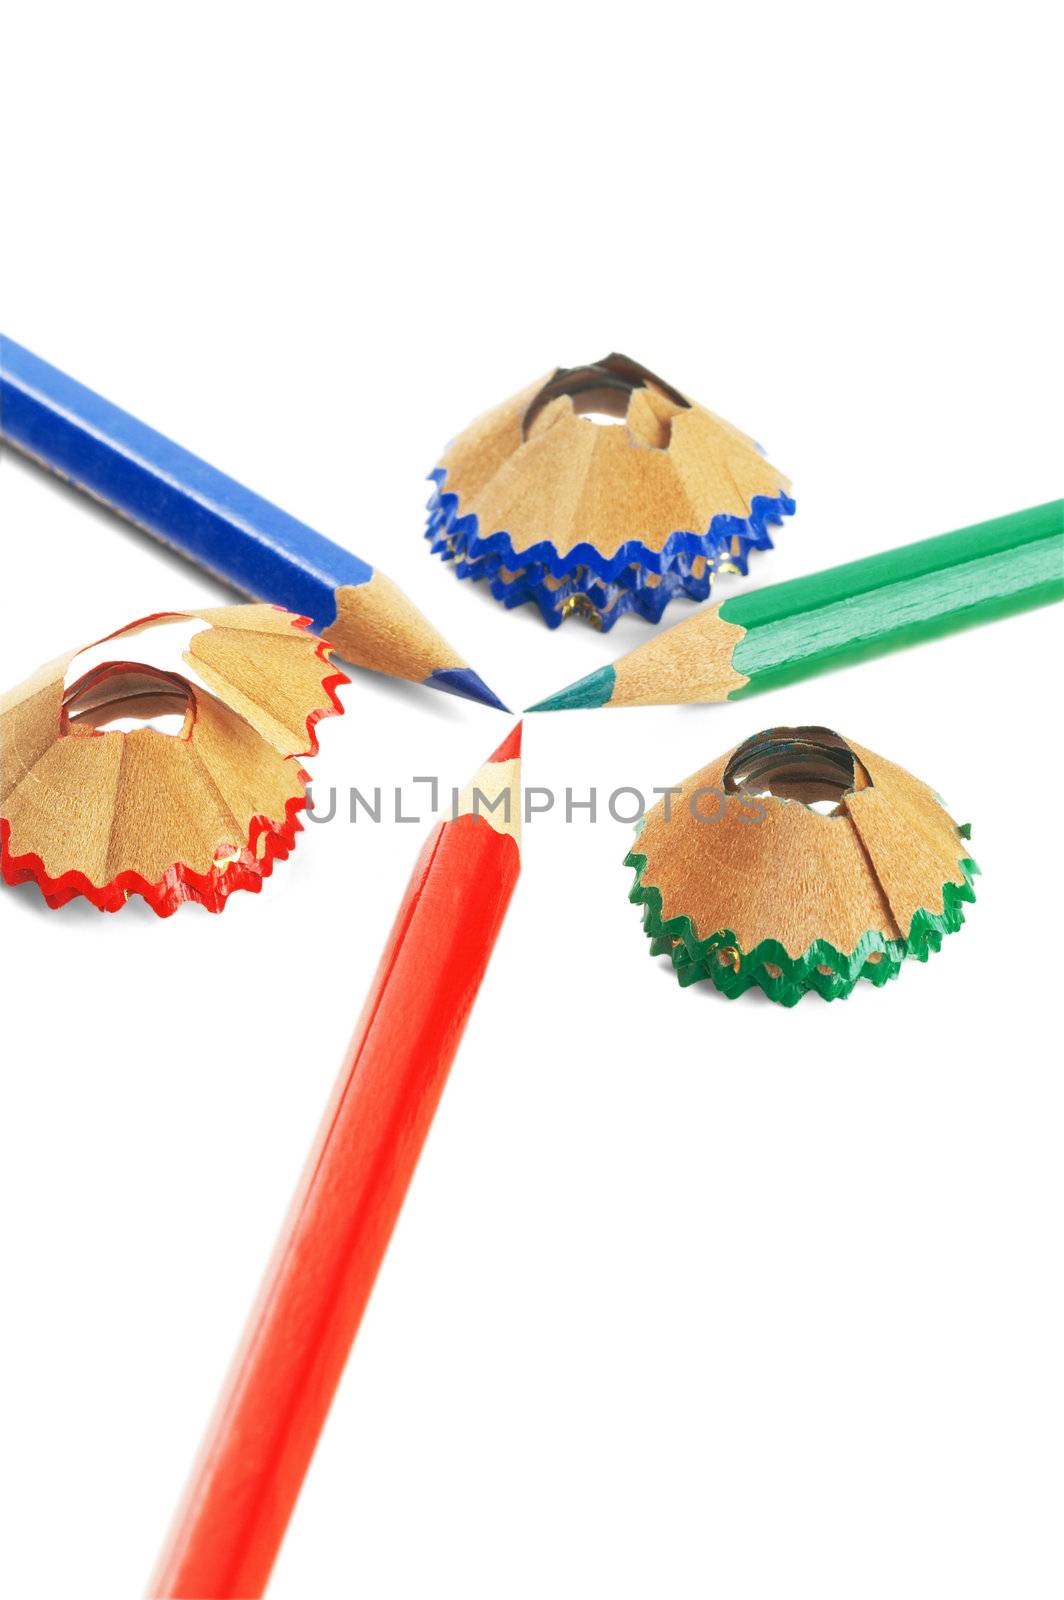 sharpened coulor pencils isolated over white background